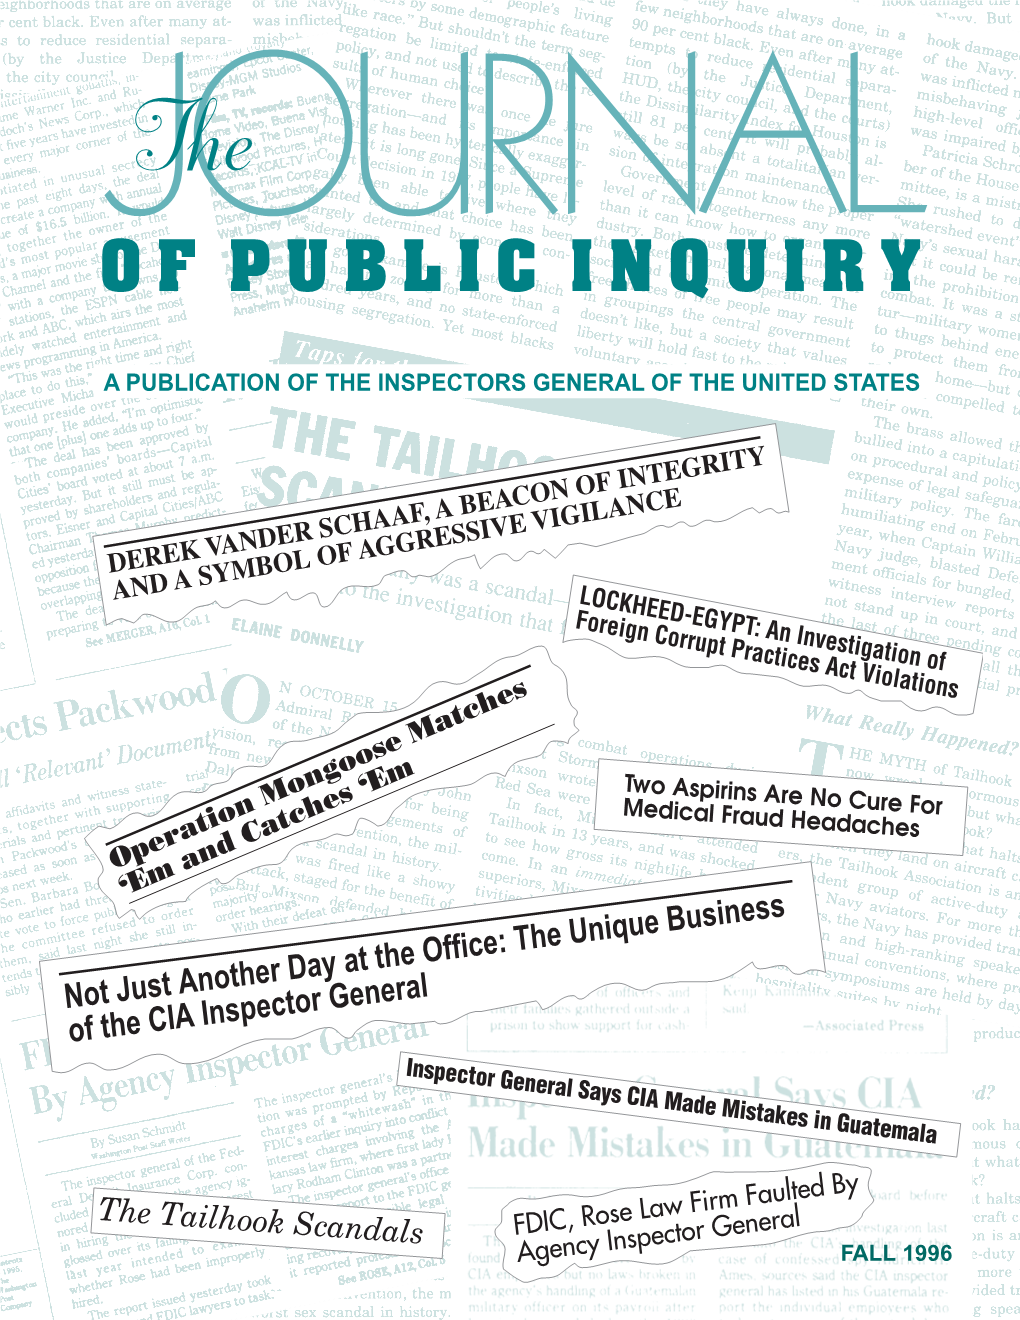 Journal of Public Inquiry Is a Publication of the Inspectors General of the United States